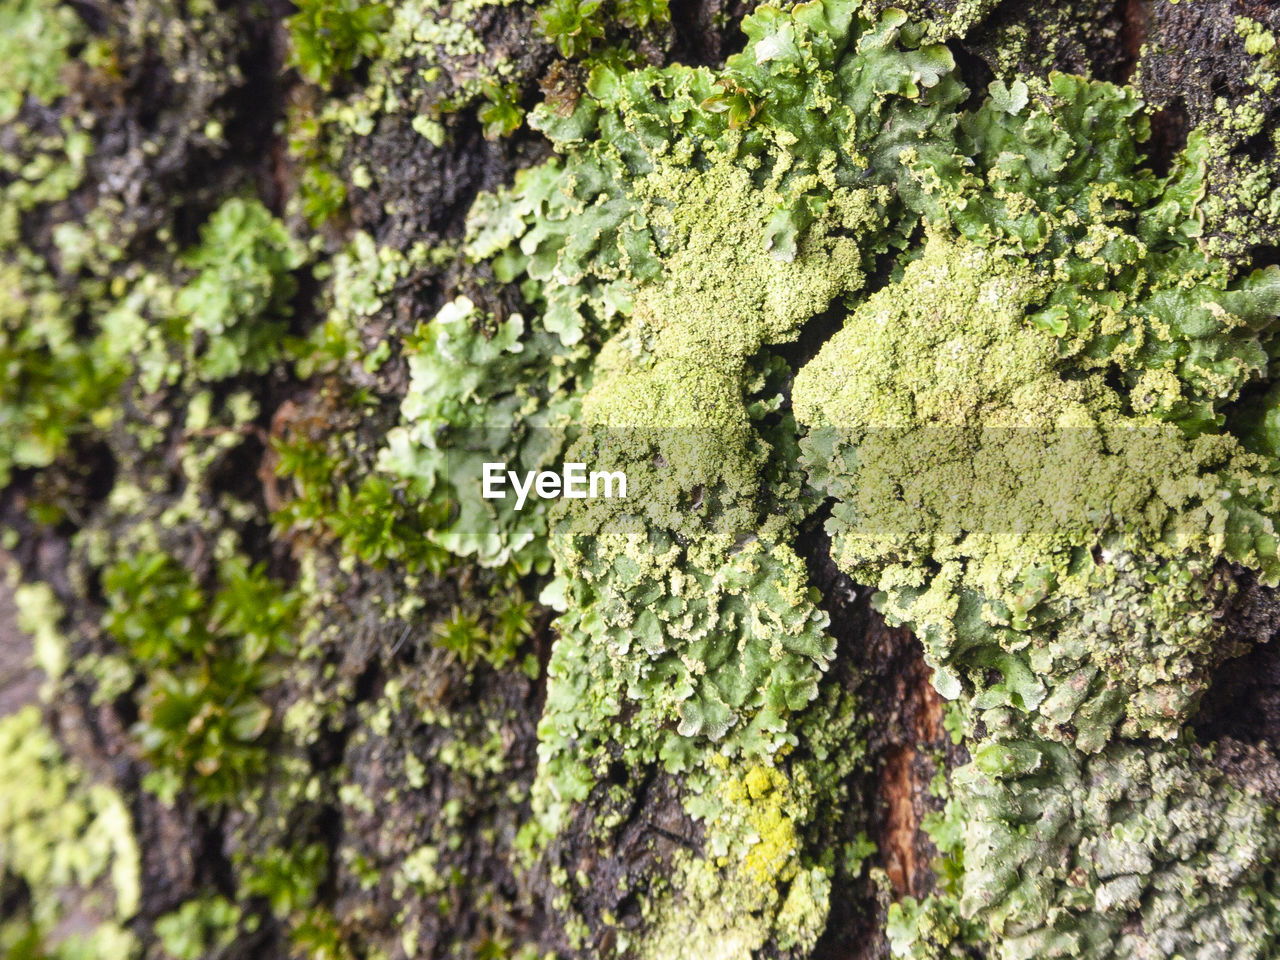 CLOSE-UP OF MOSS ON TREE TRUNK